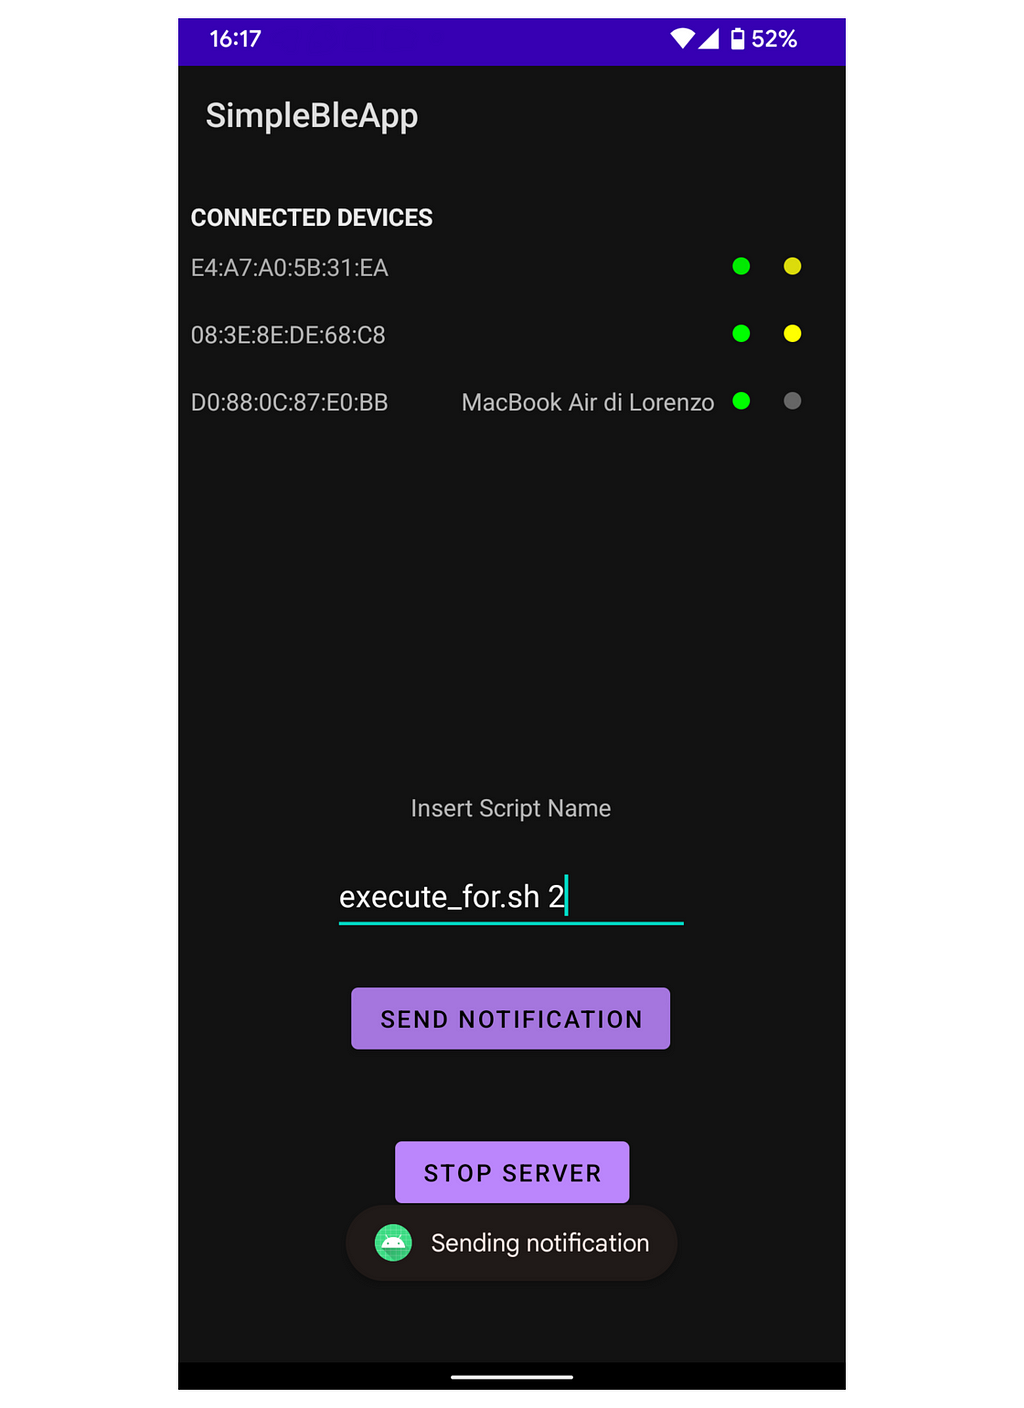 Screenshot of the Android app UI, showing 3 connected devices, two of which are executing an operation and the other one not yet